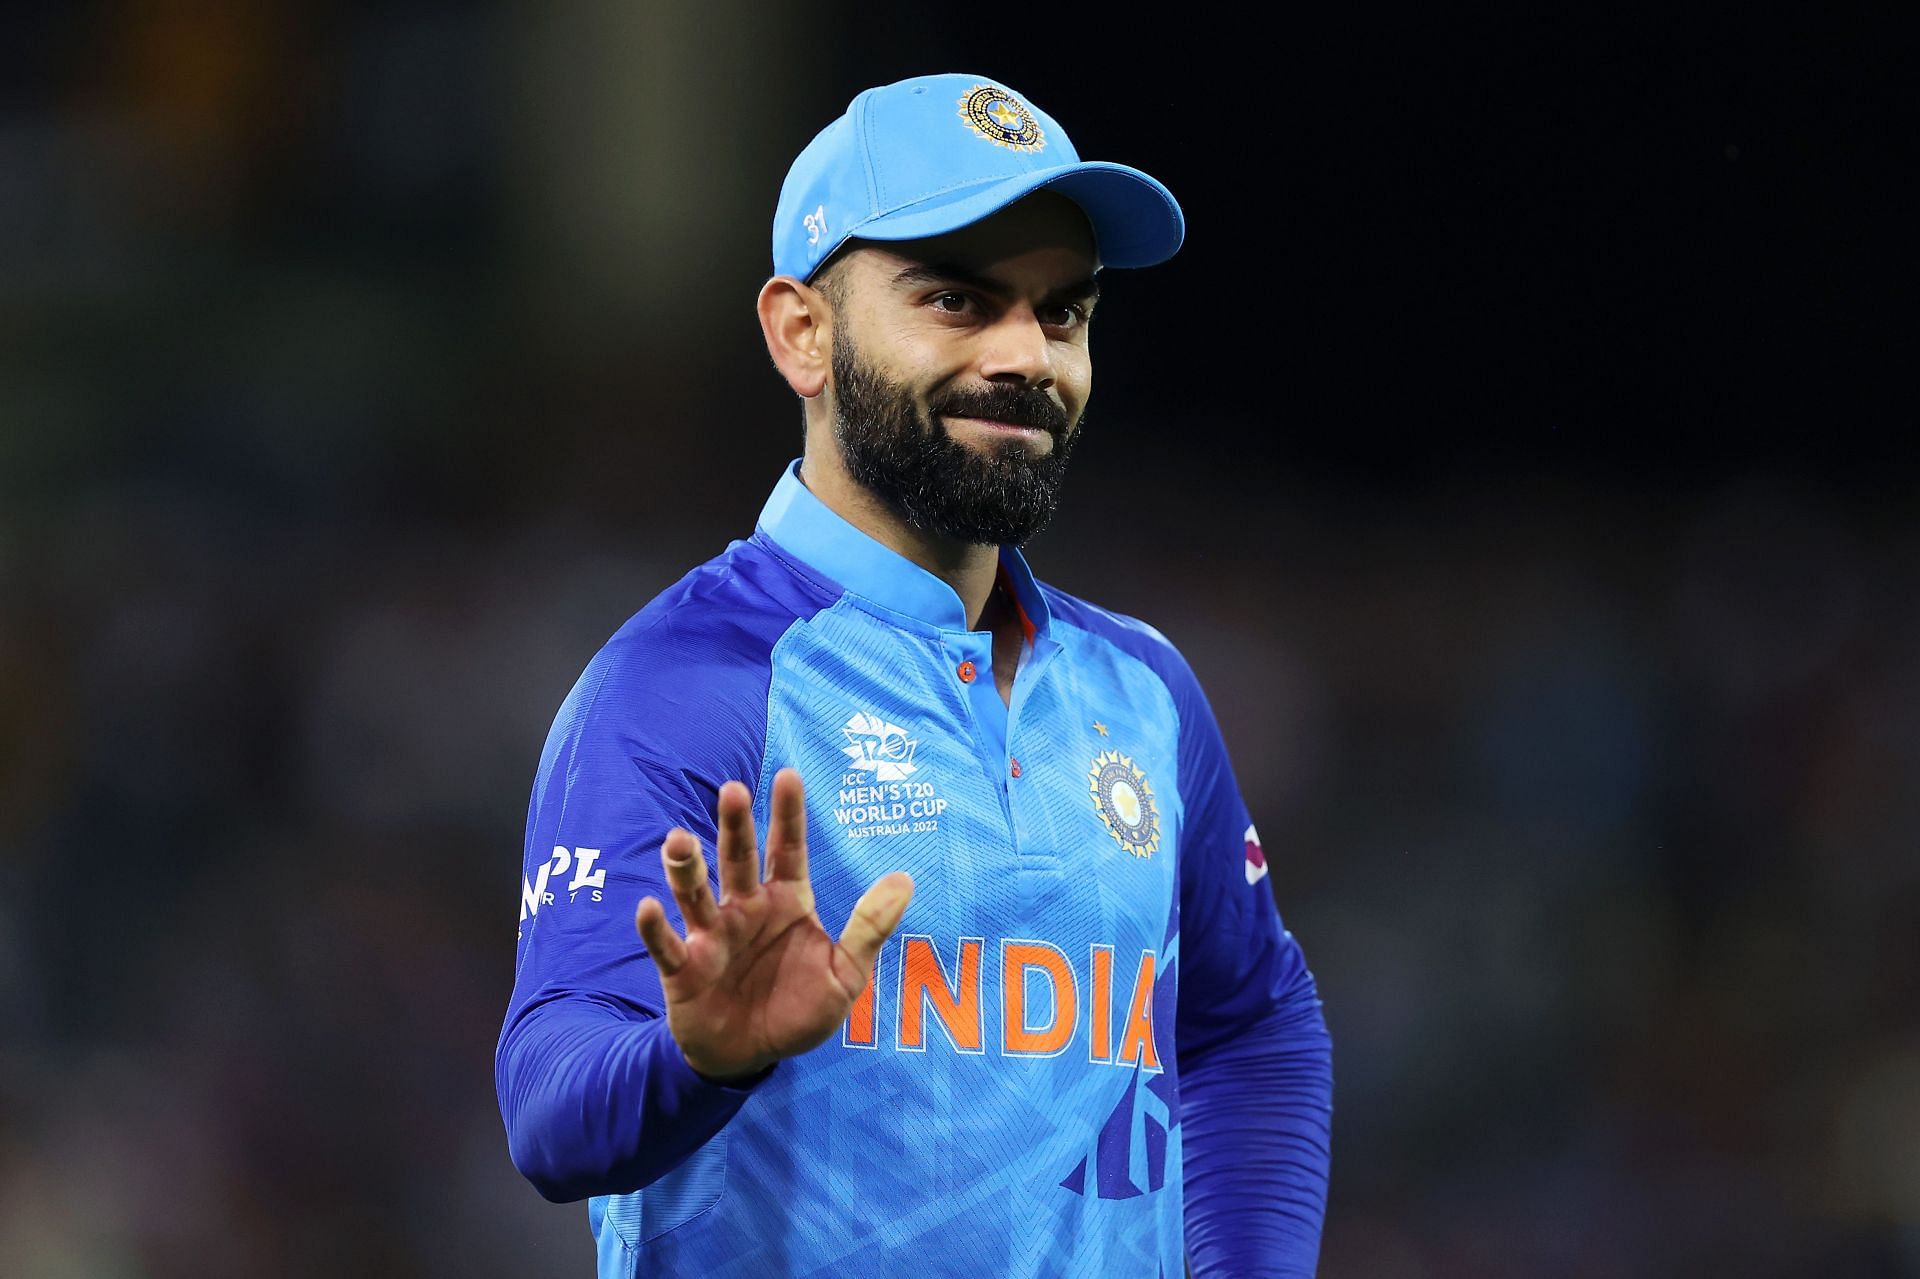 Virat Kohli would be looking to continue his good form in T20Is into the longer format